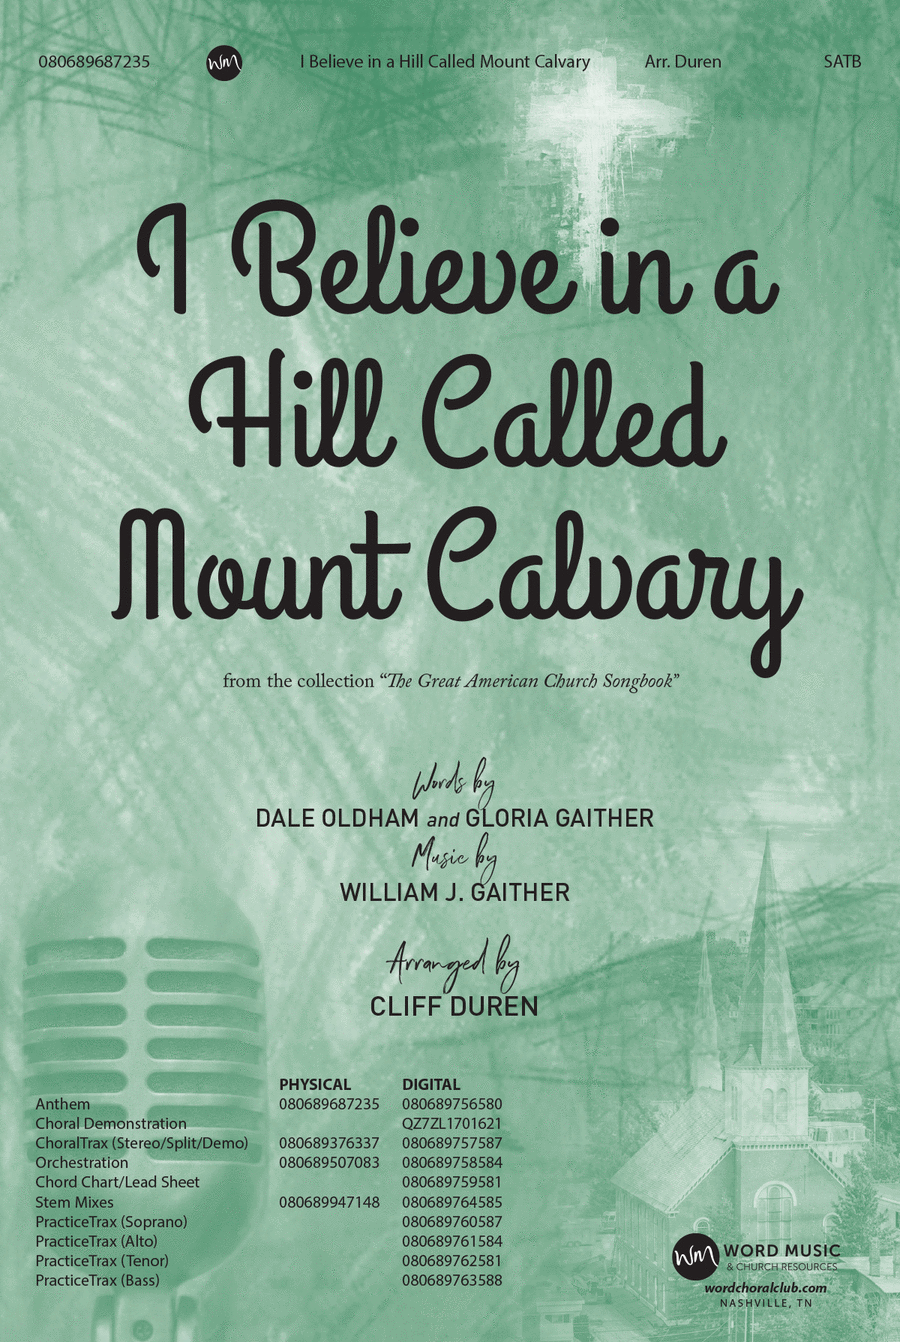 I Believe in a Hill Called Mount Calvary - Stem Mixes